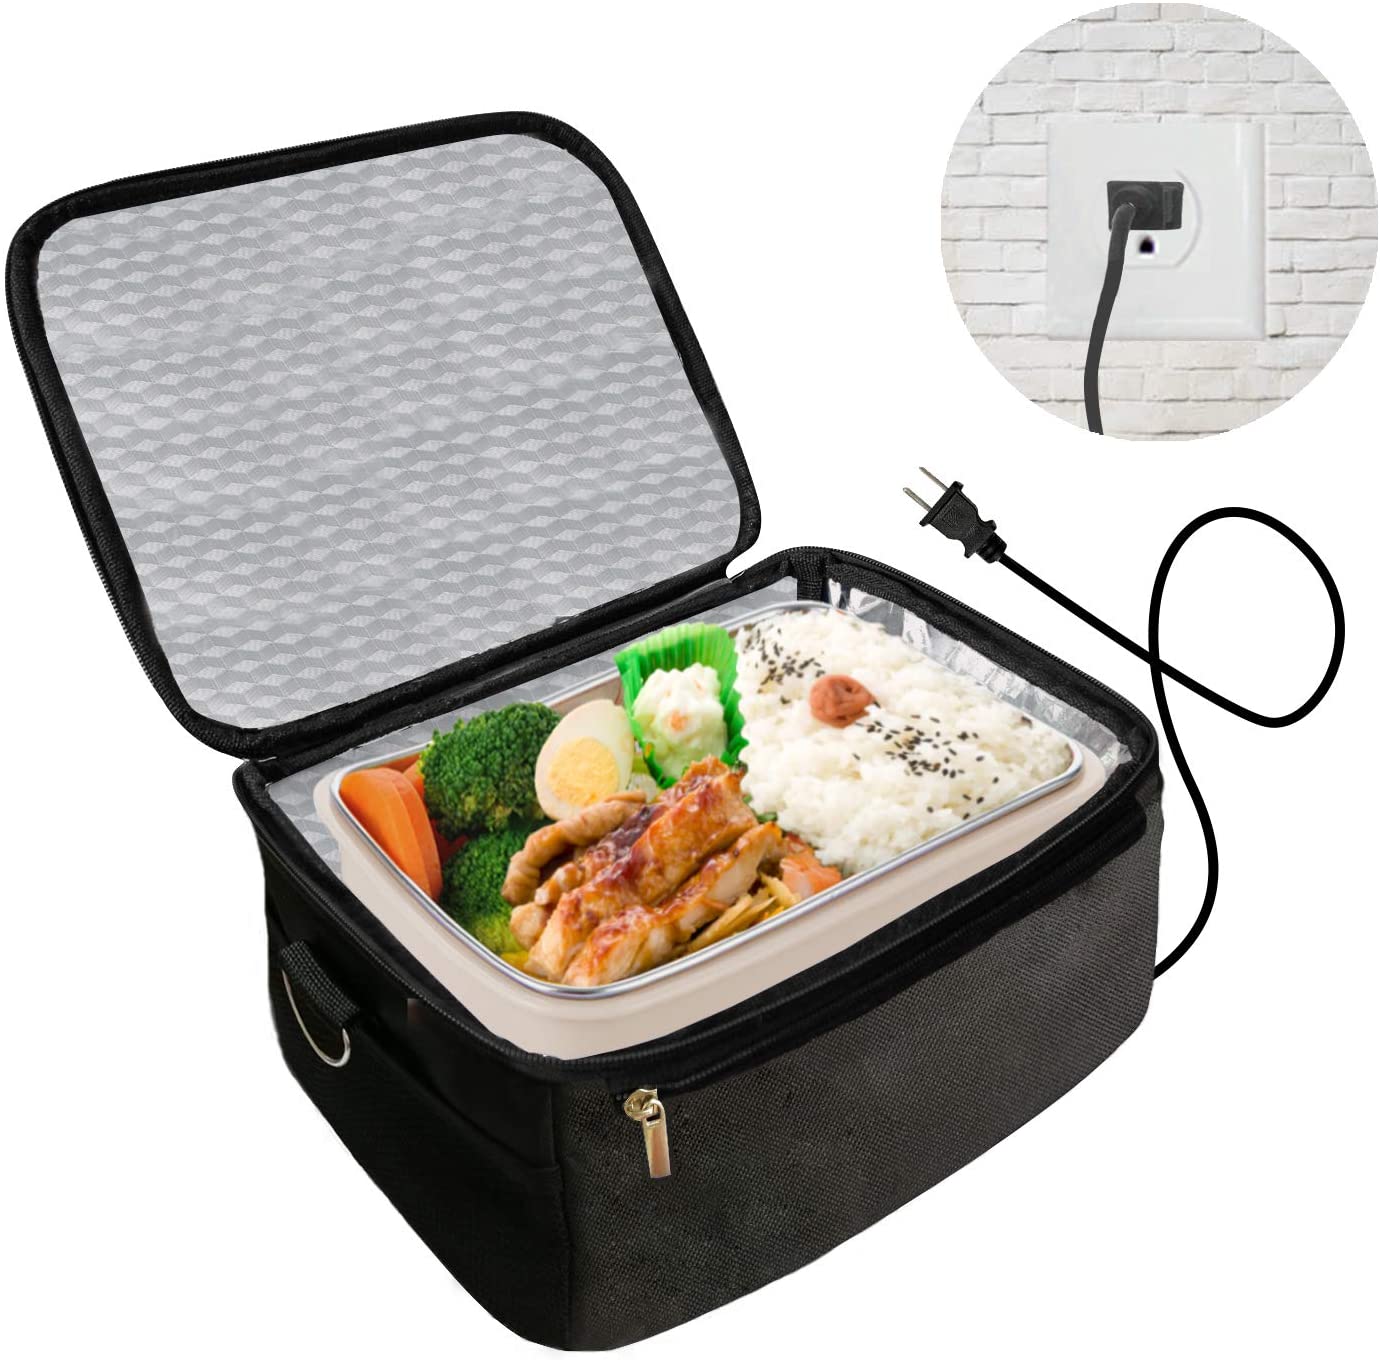 Electric lunch box - Rutos